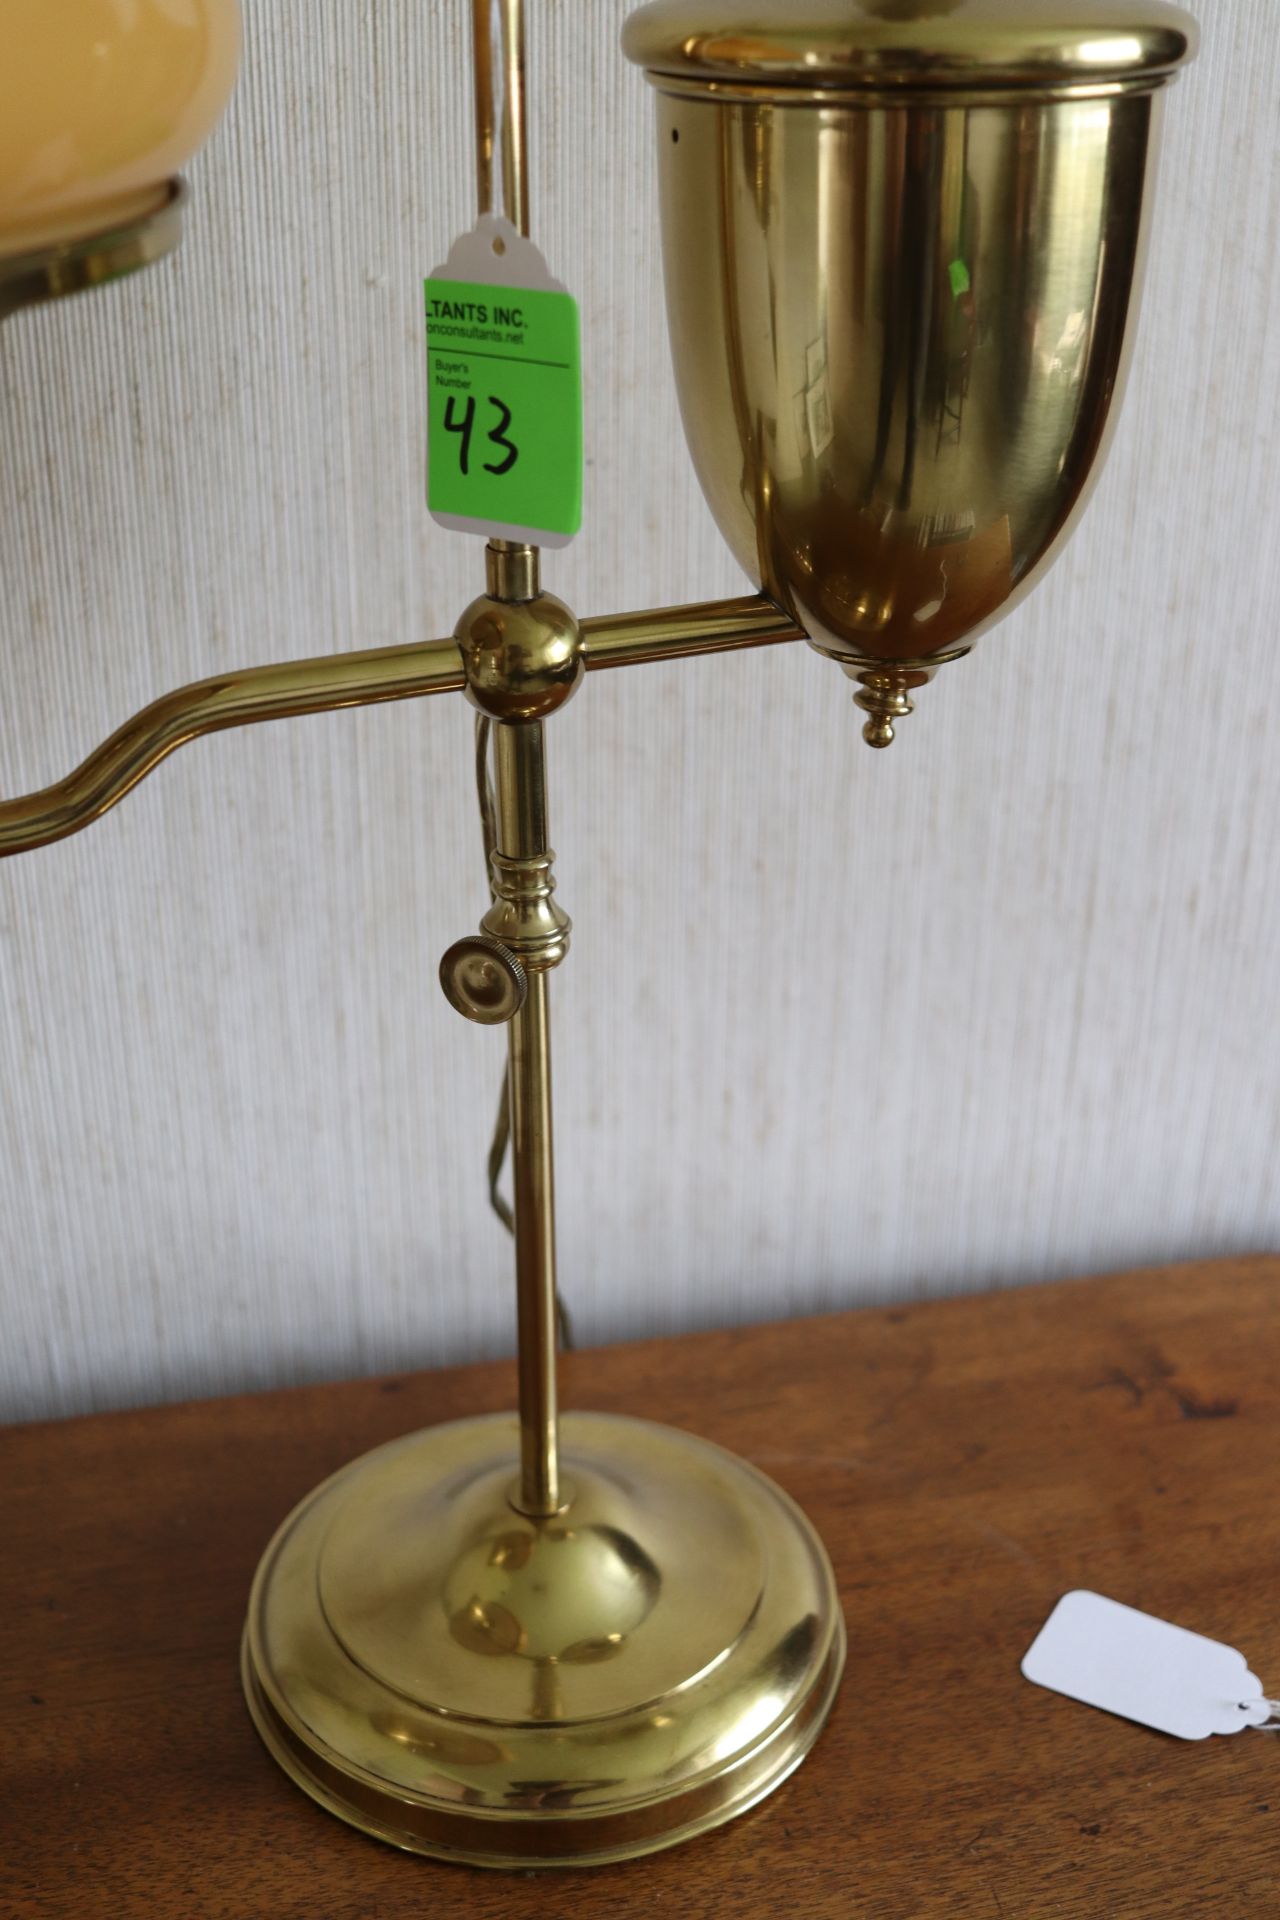 brass candle design table lamp fitted with a beige shade, approximate height 24" - Image 3 of 3